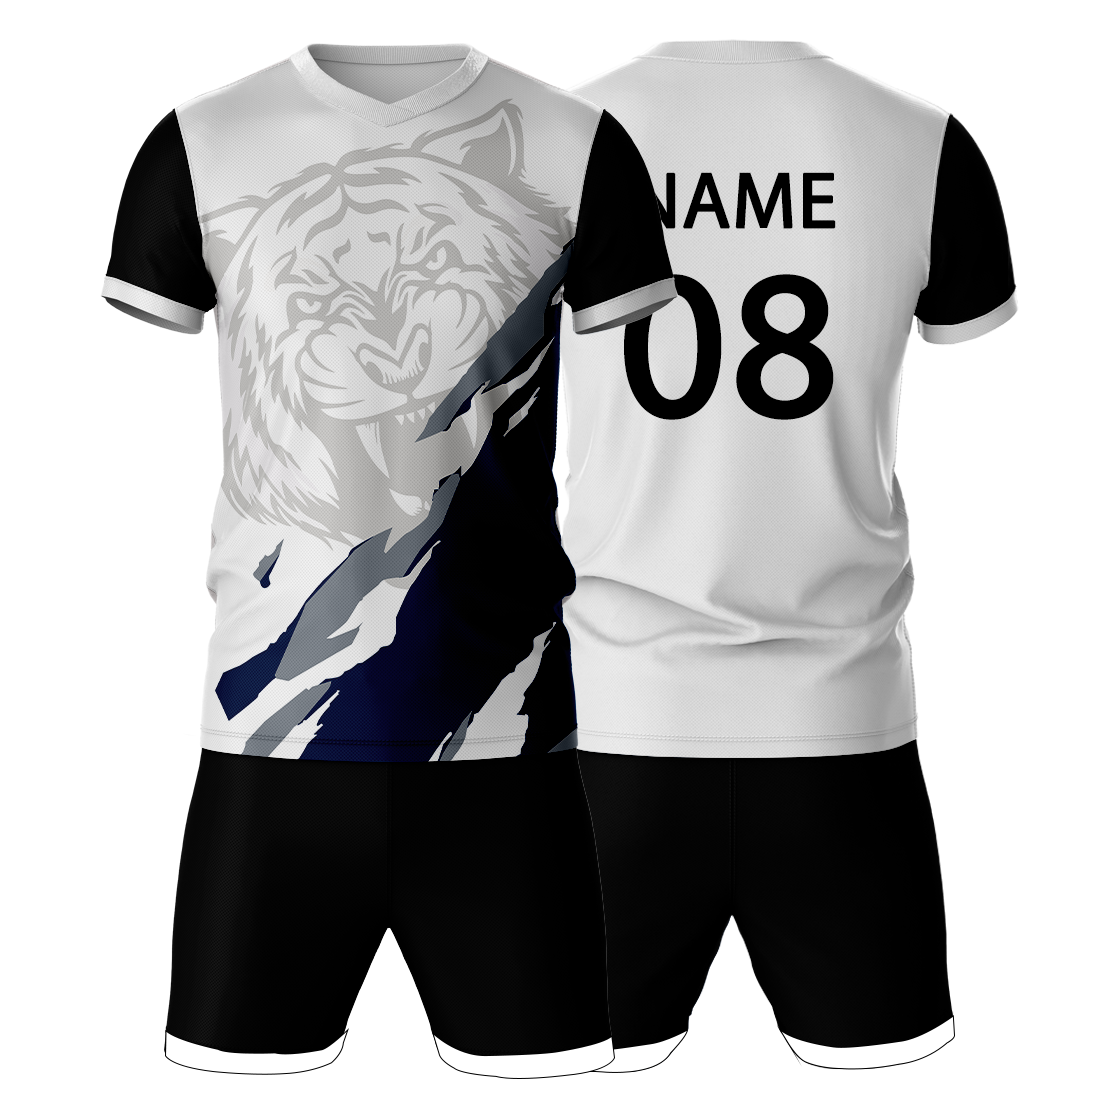 All Over Printed Jersey With Shorts Name & Number Printed.NP50000689